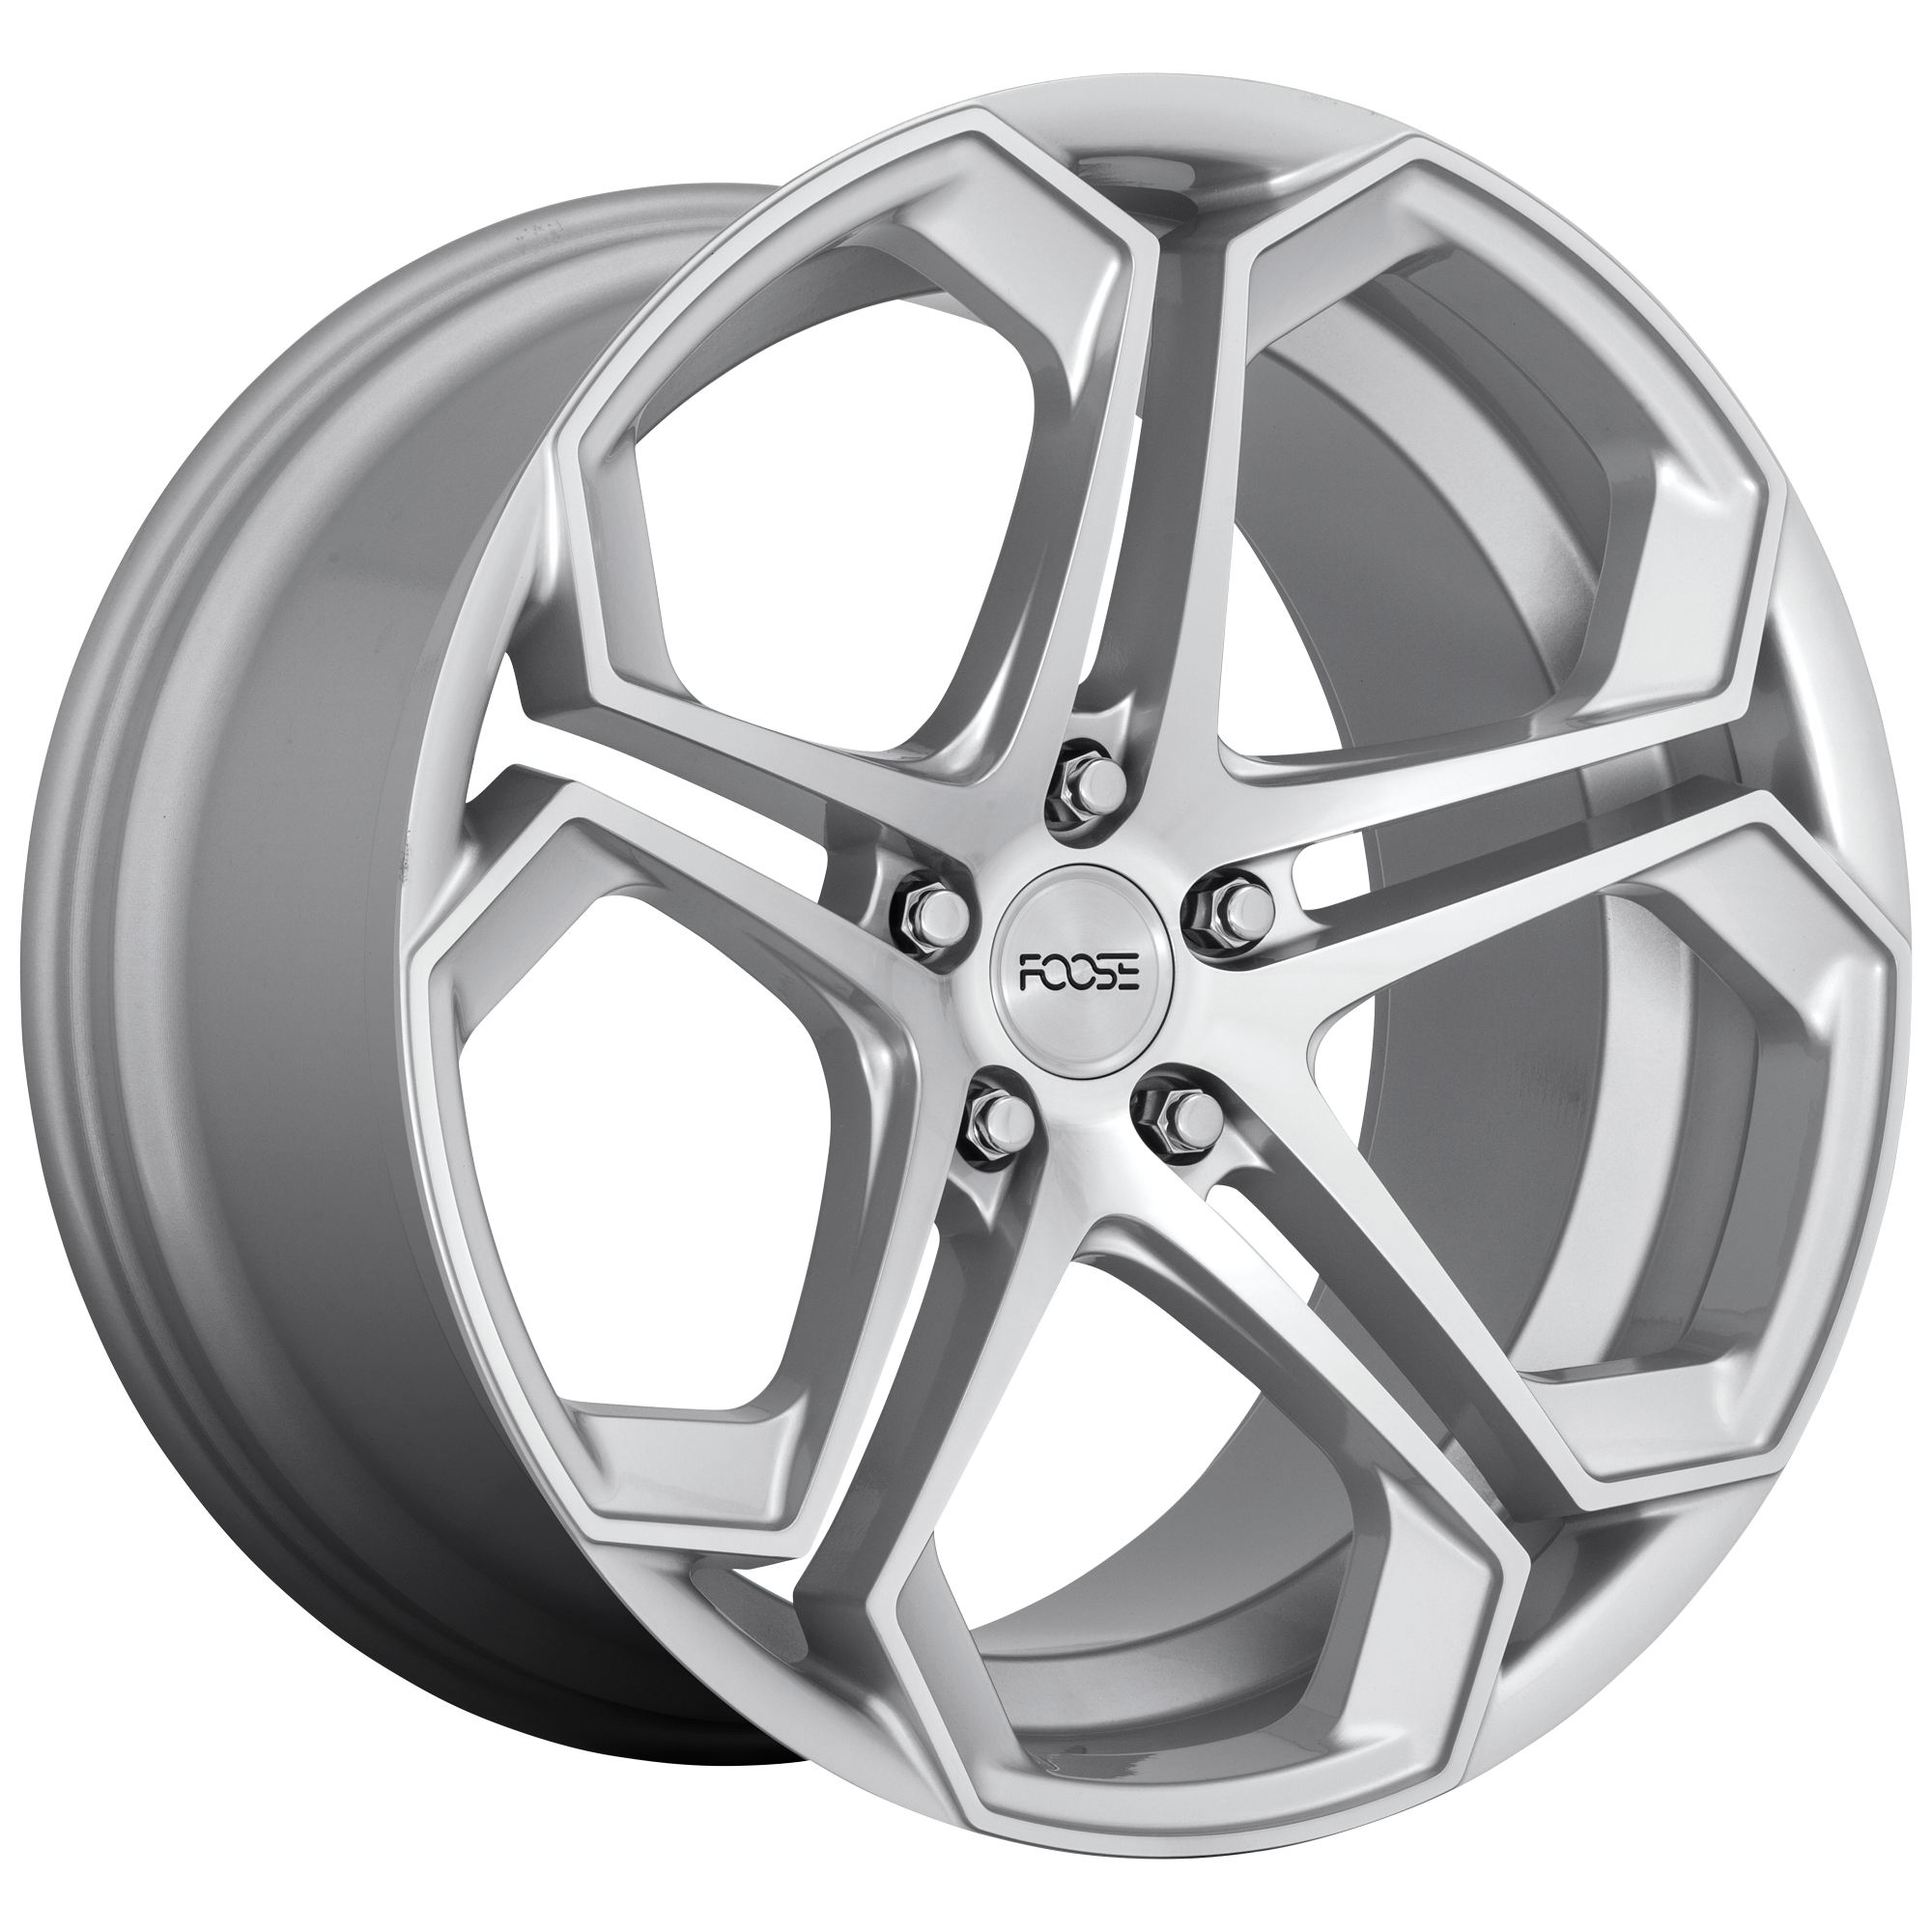 IMPALA 20x9 5x120.00 GLOSS SILVER MACHINED (35 mm) - Tires and Engine Performance